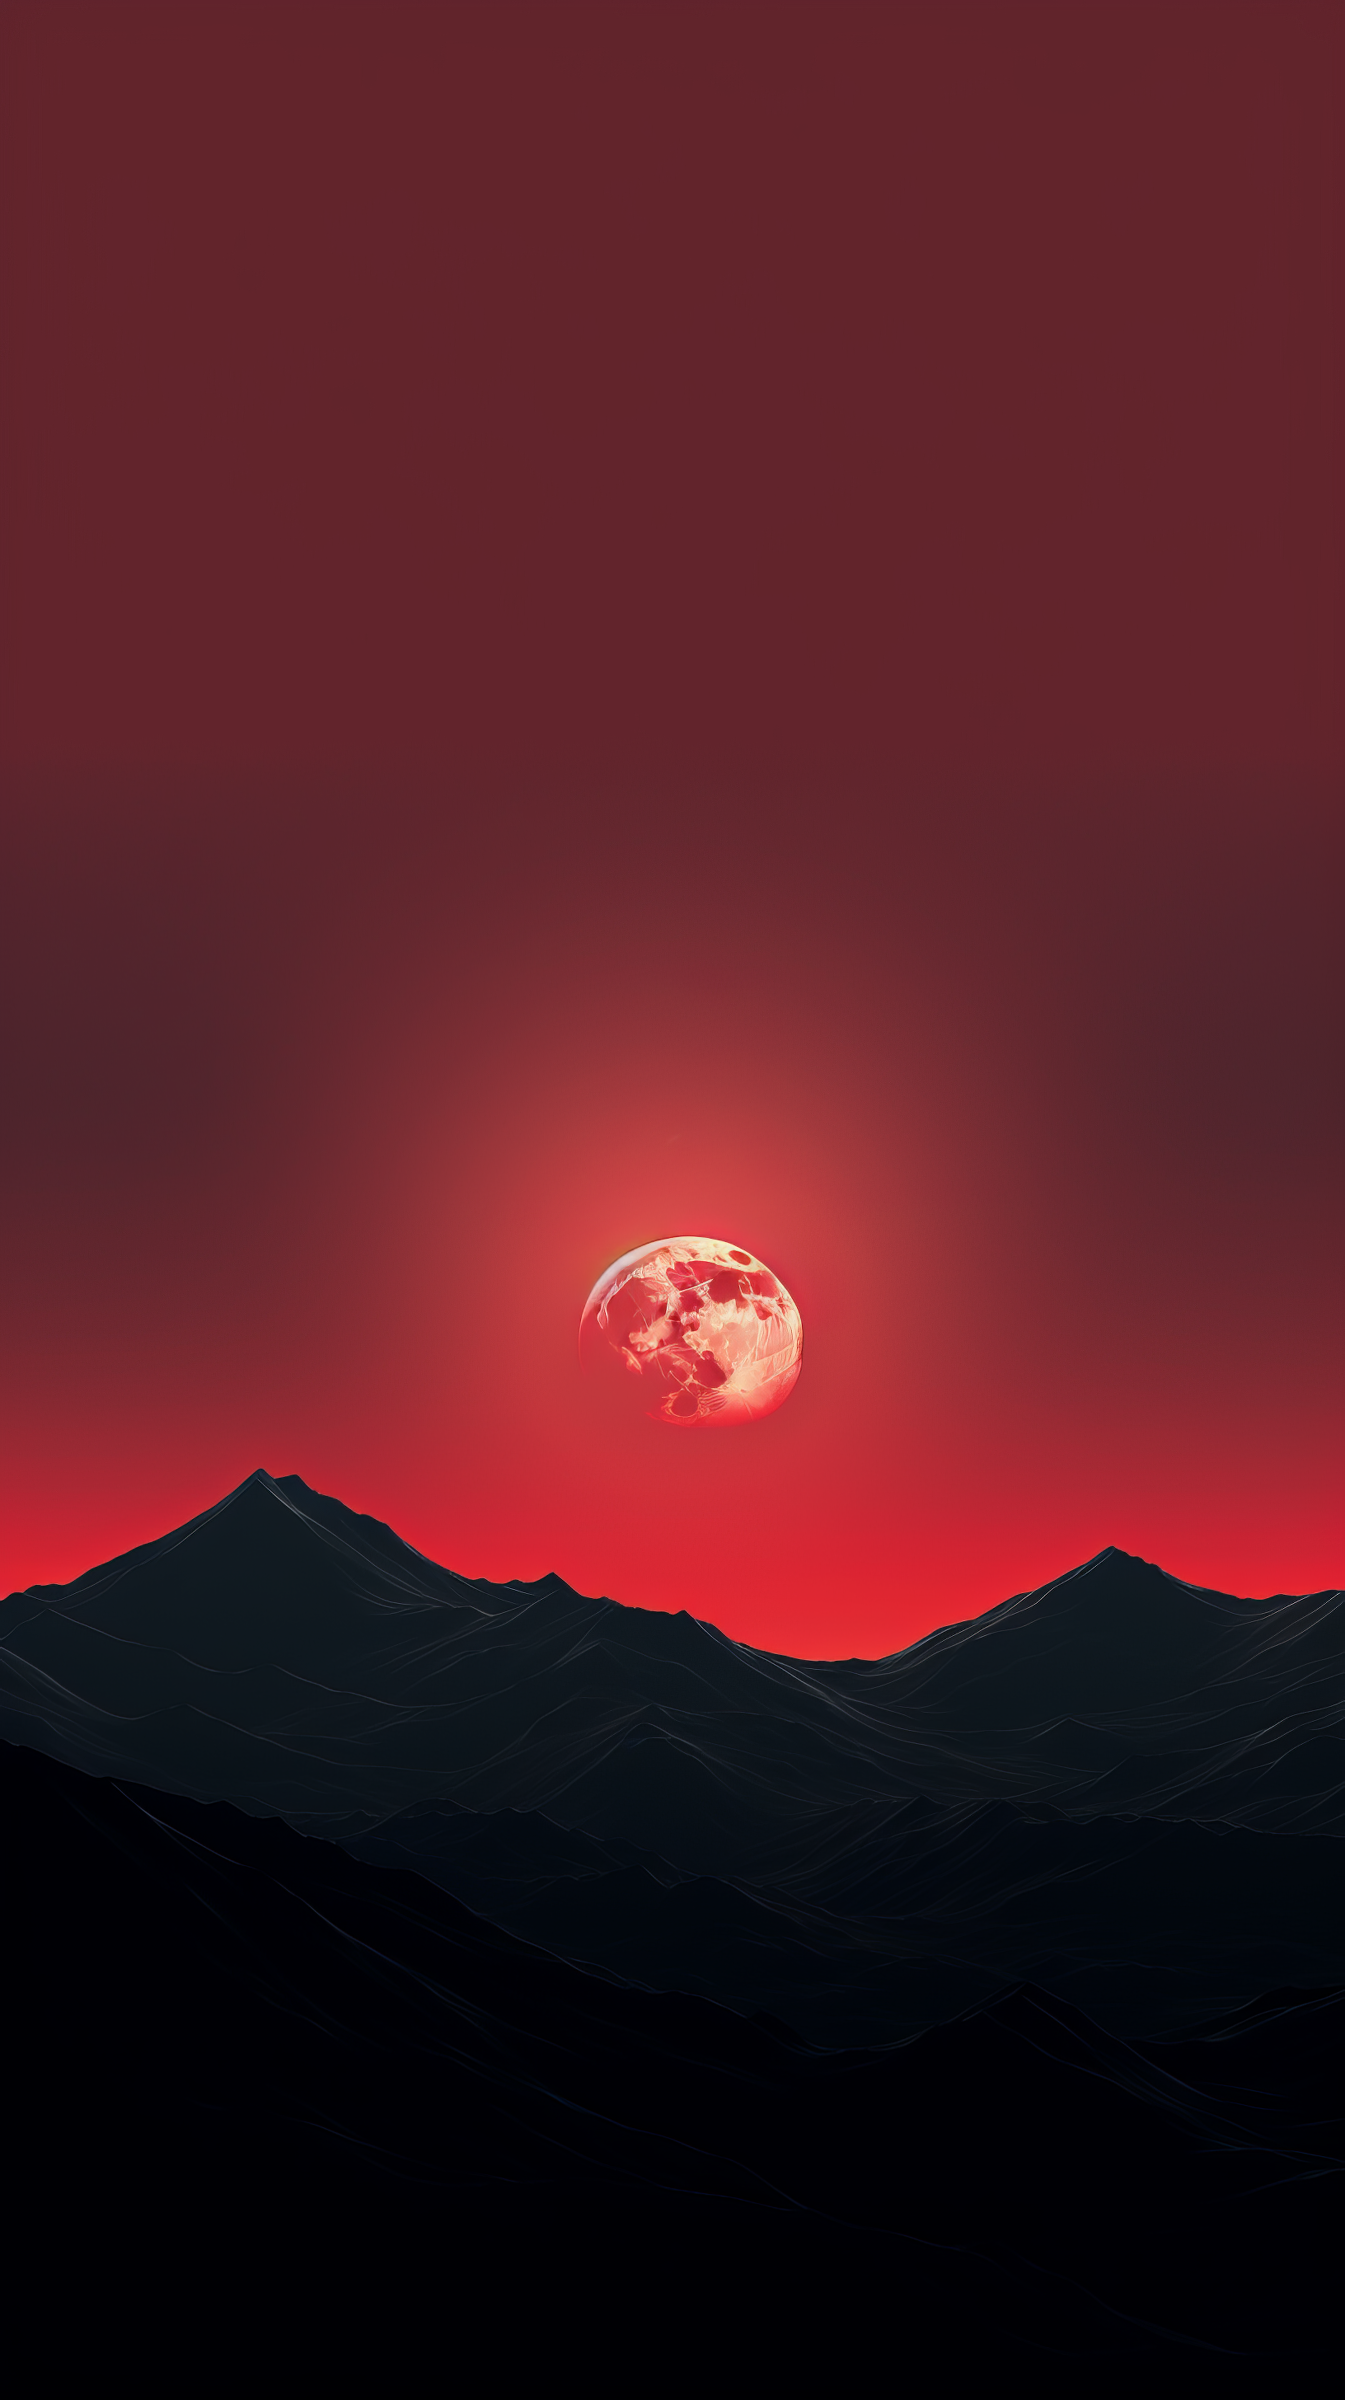 Aesthetic mountain silhouette with a moon against a crimson sky, perfect for phone wallpaper.